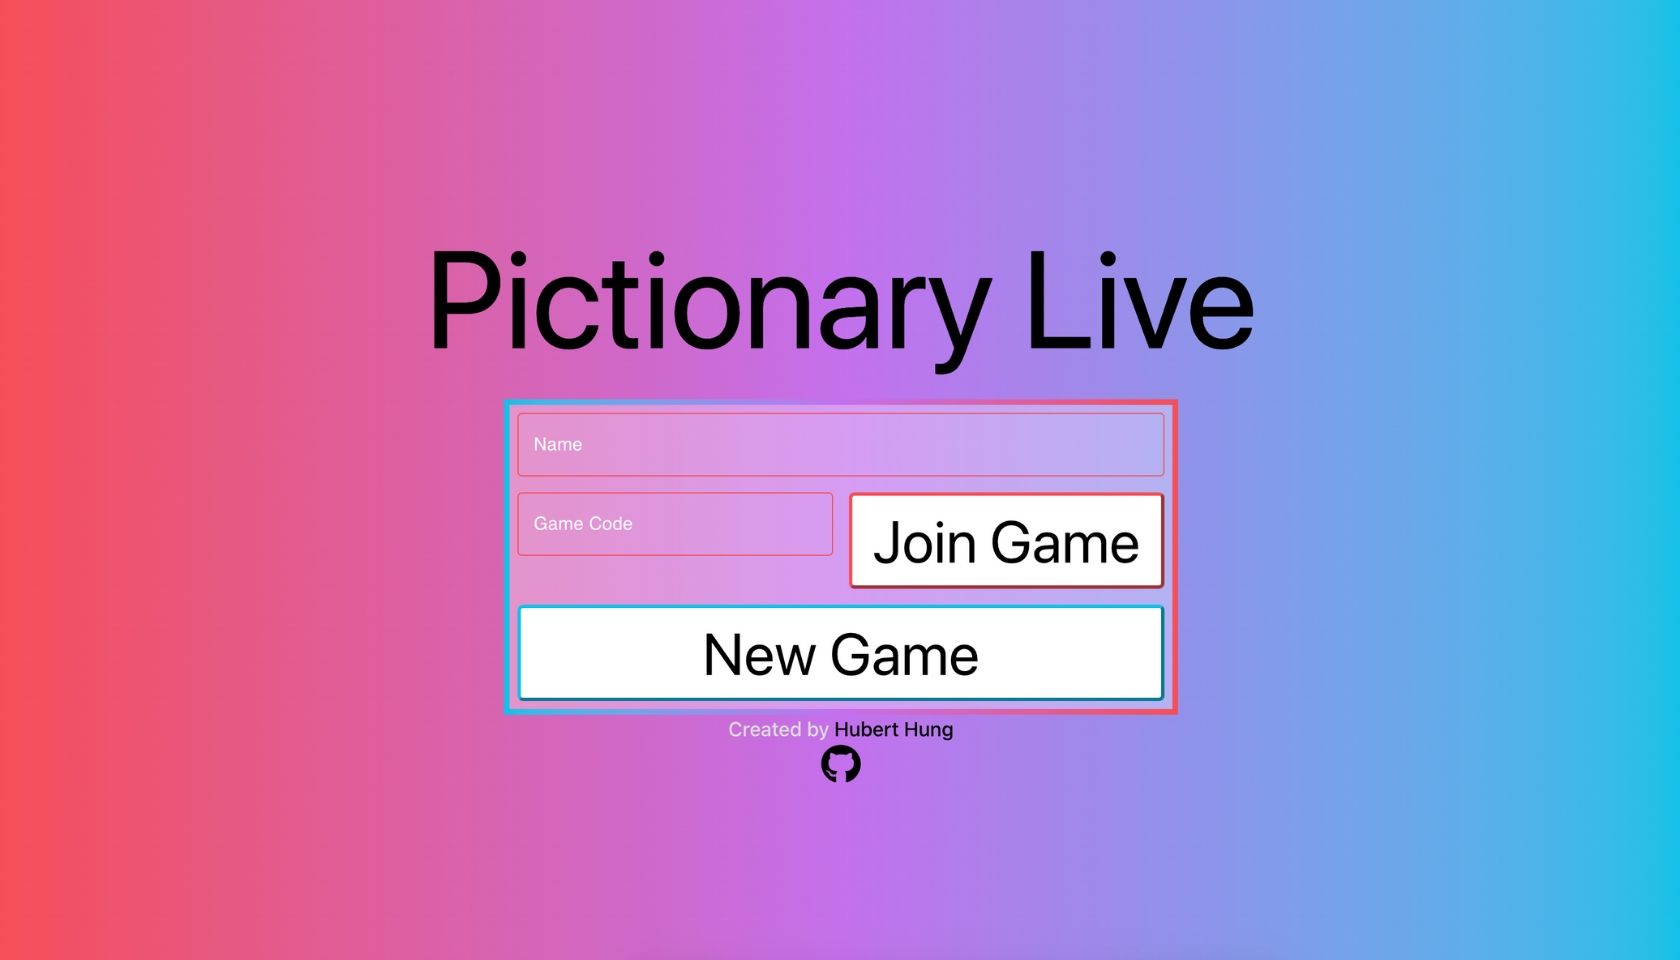 Pictionary Live